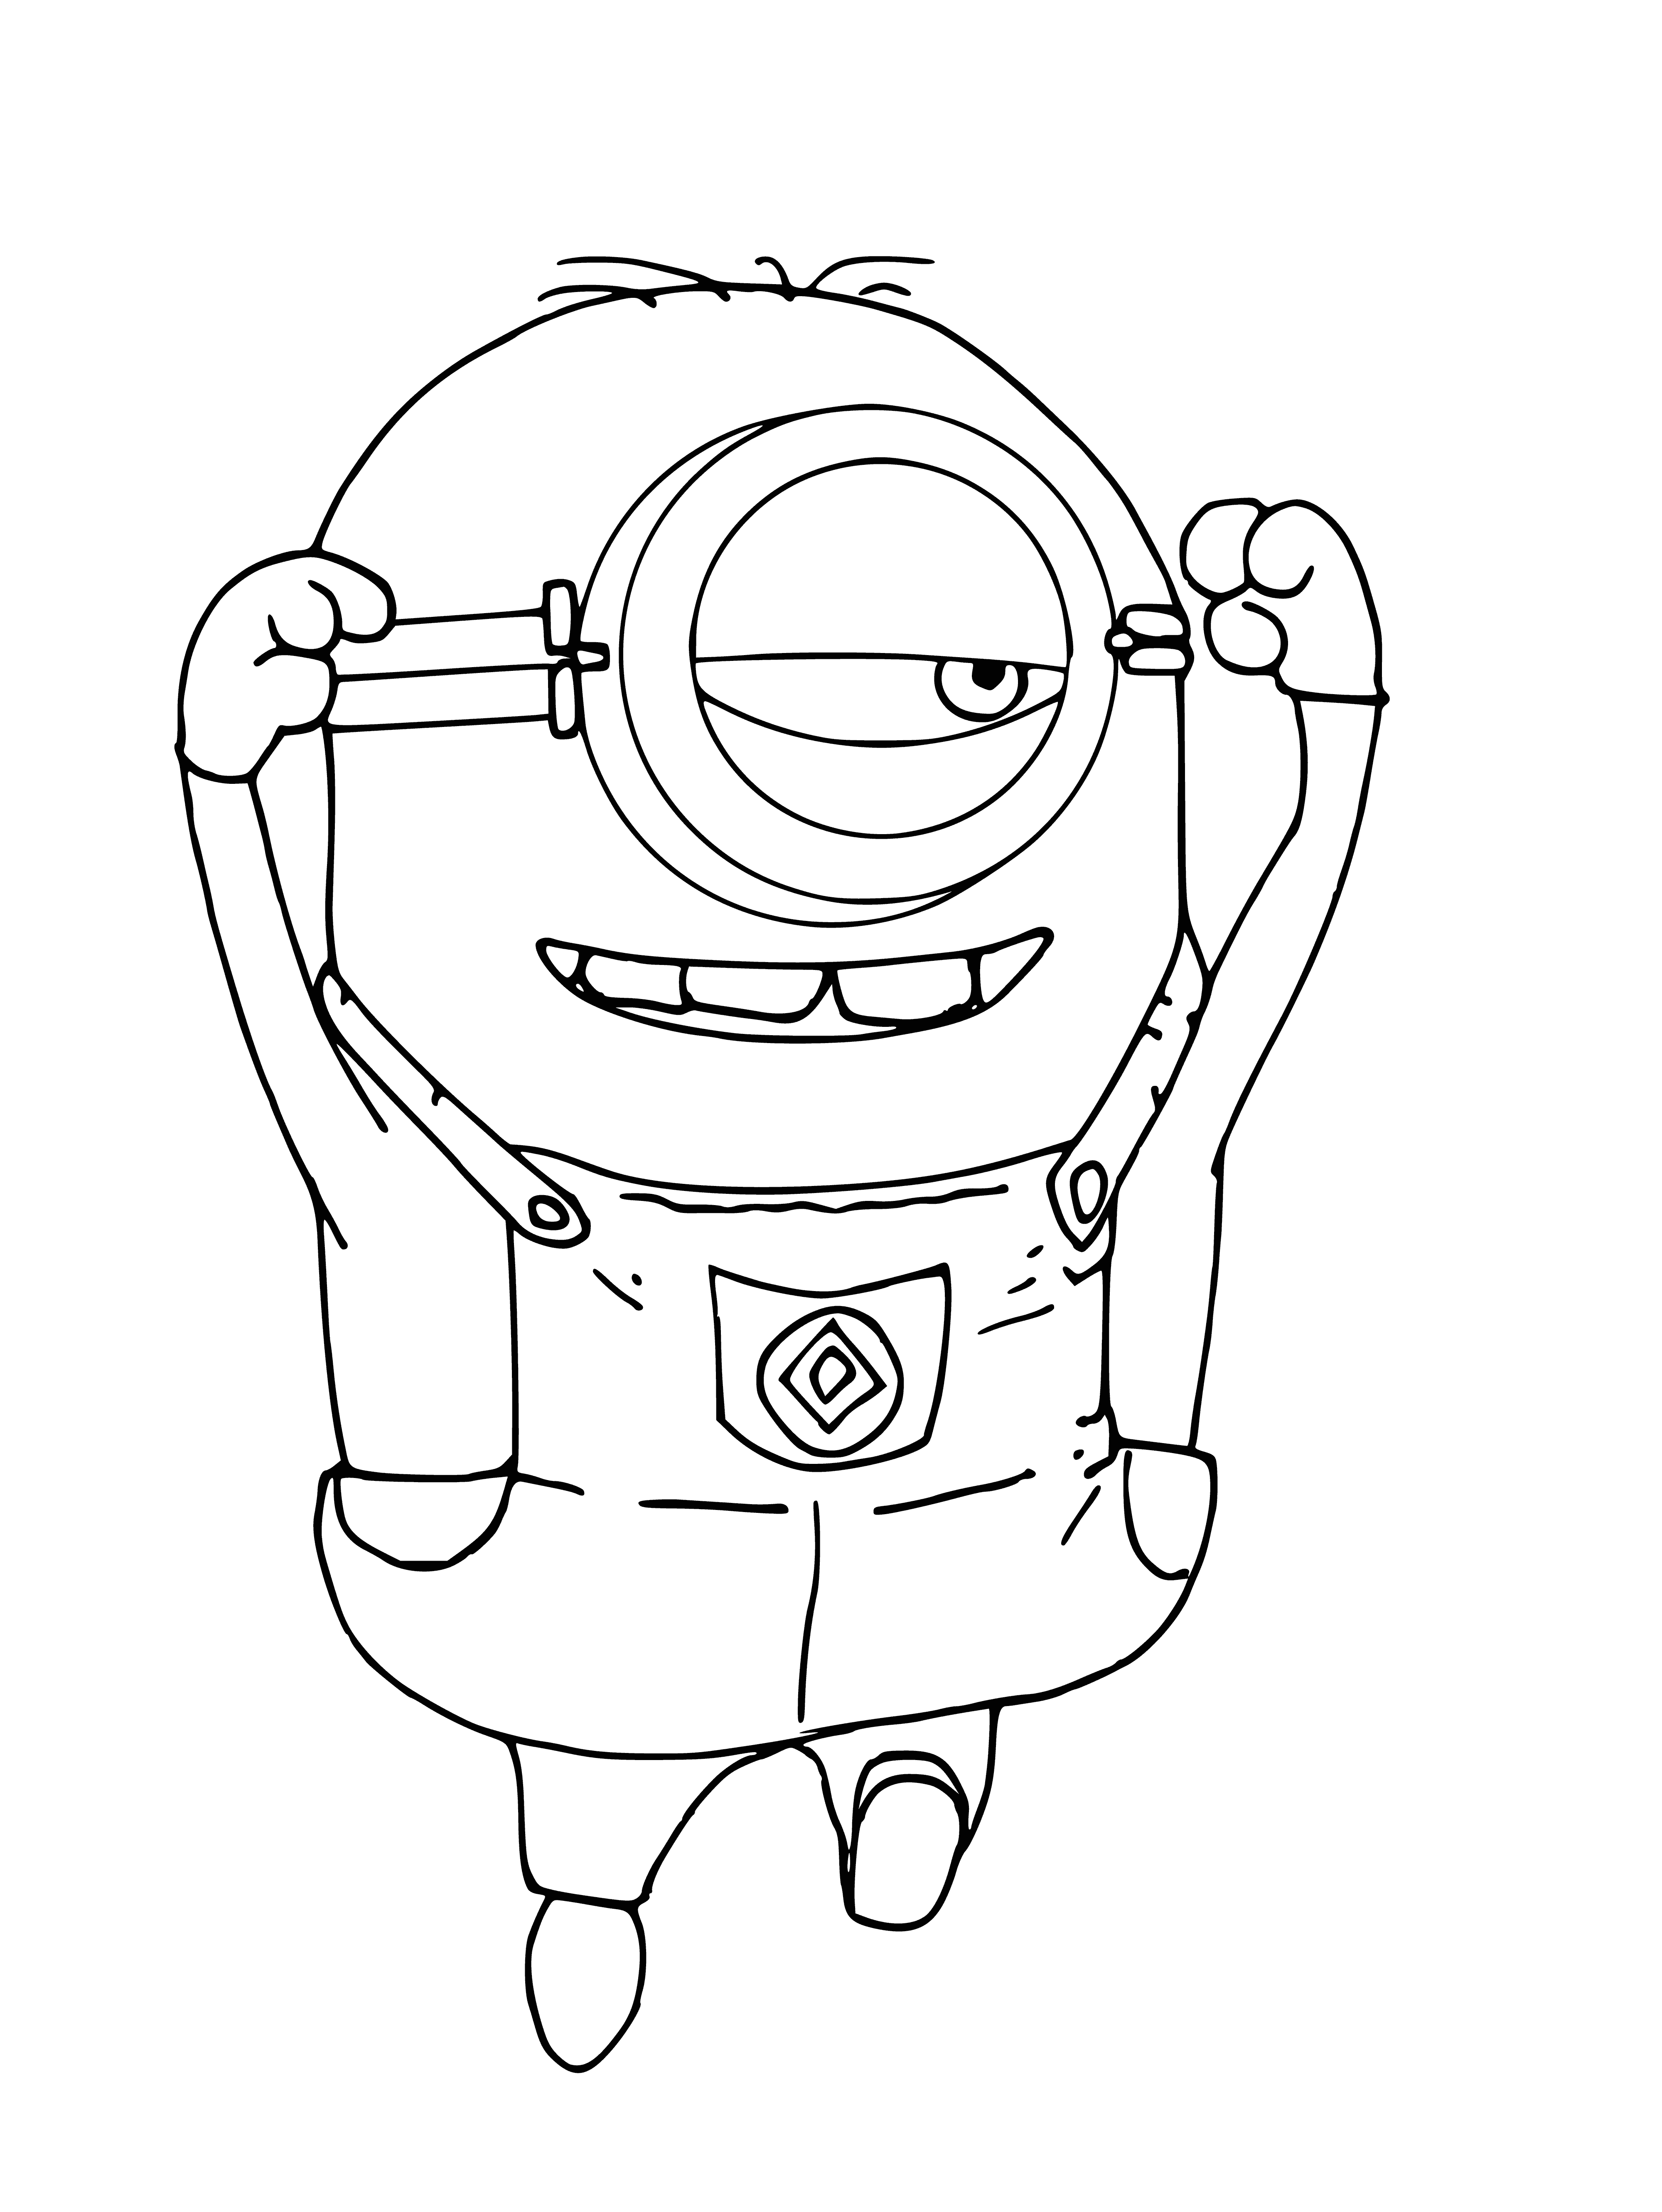 coloring page: Color the Despicable Me character - a small brown fluffy creature with big eyes wearing a red & white striped shirt & red bowtie.